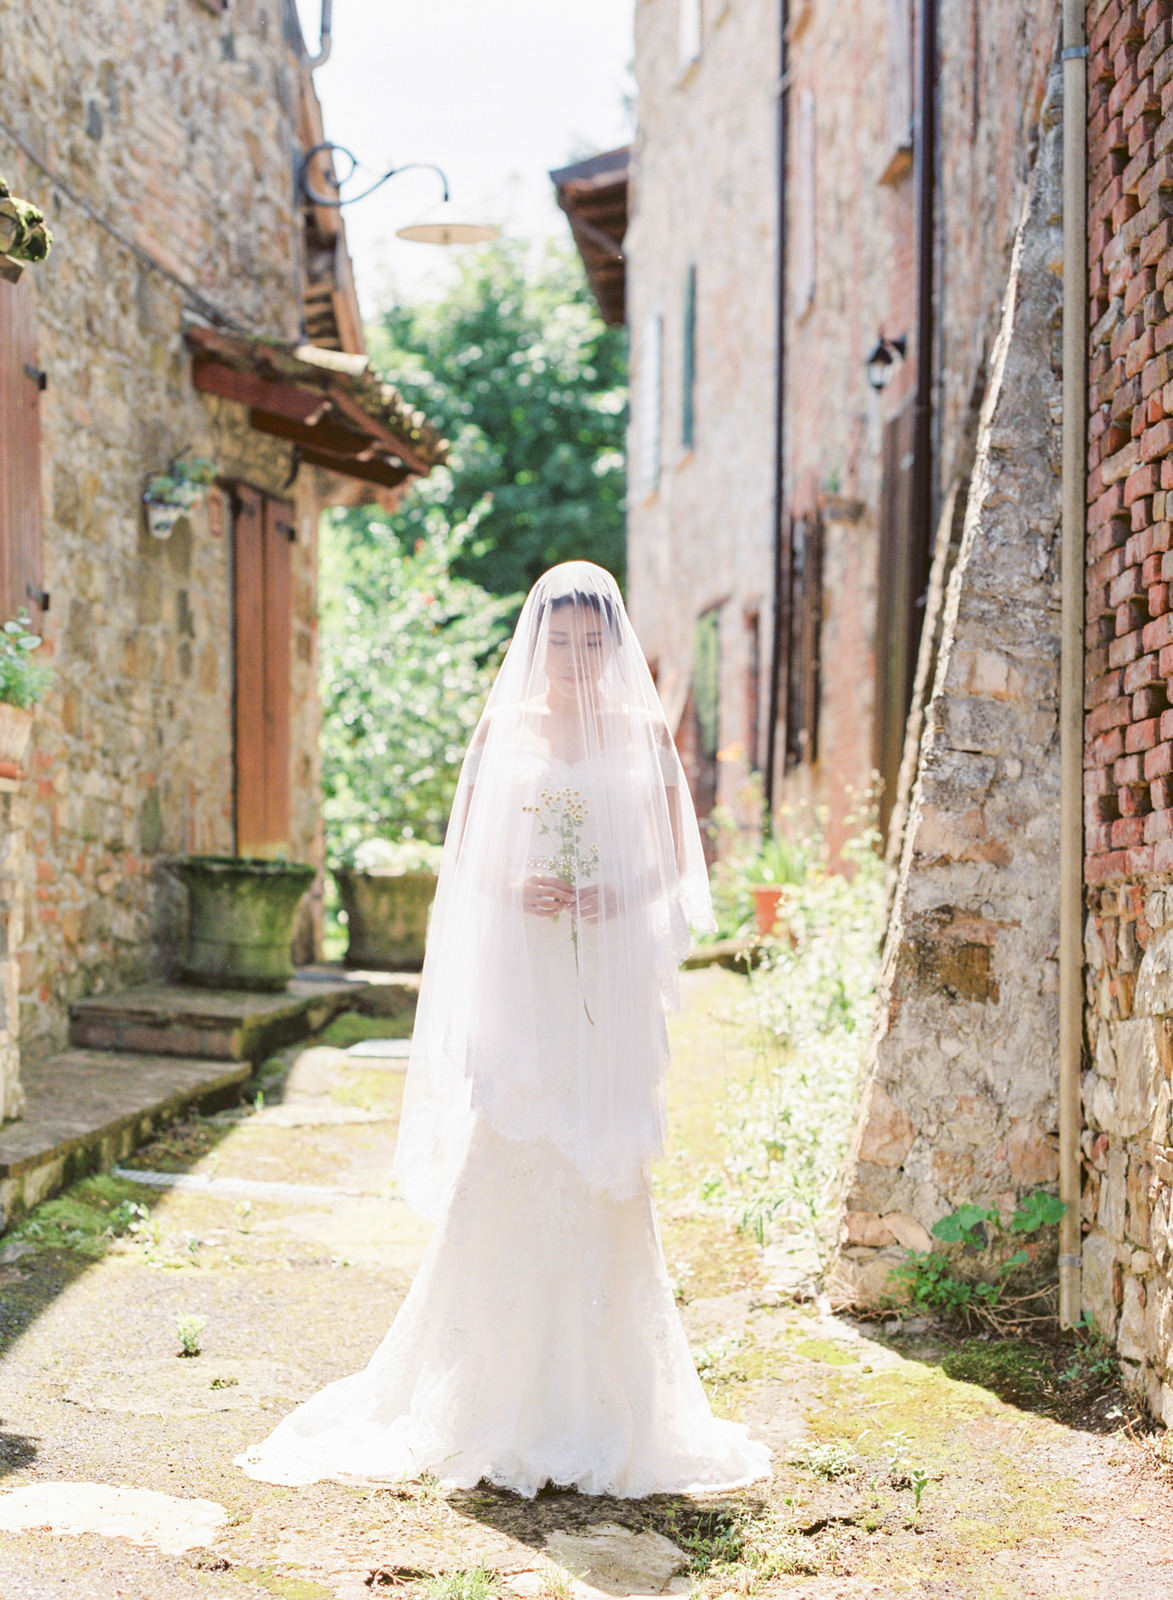 Destination Wedding in Milan Italy by Fine Art Photographer CHYMO & MORE www.chymomore.com